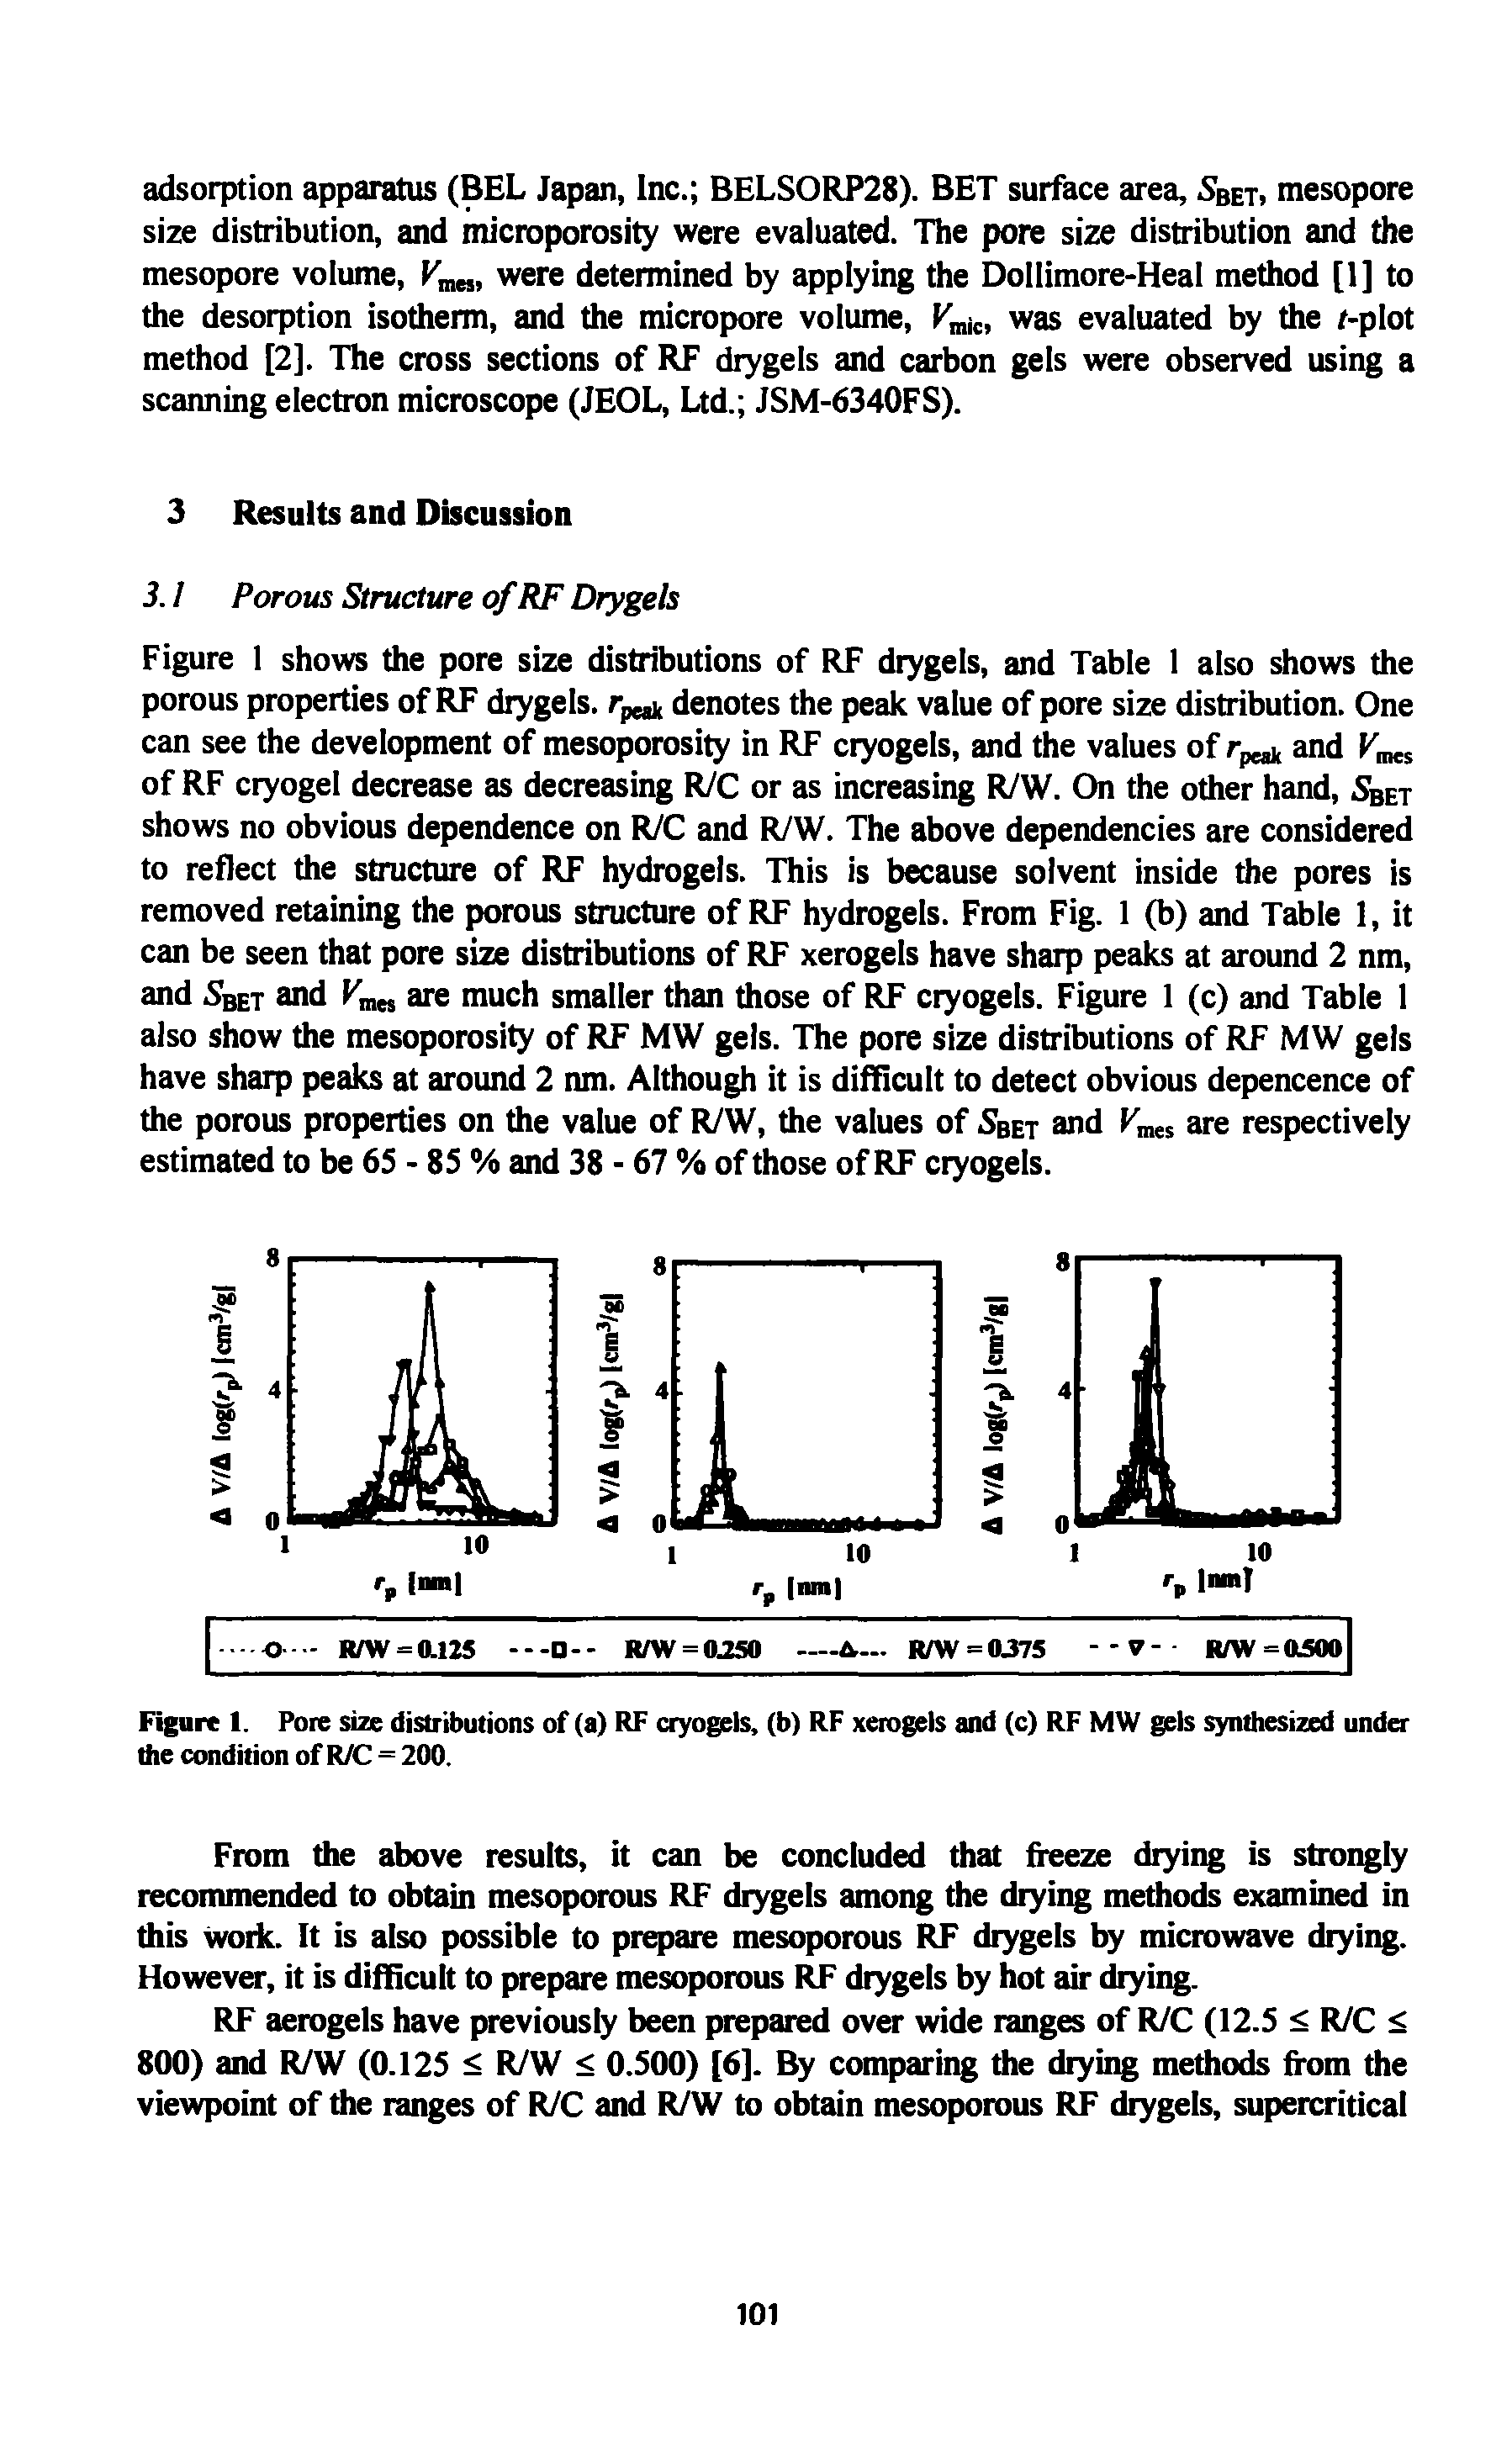 Figure 1. Pore size disuibutions of (a) RF cryogels, (b) RF xerogels and (c) RF MW gels synthesized under the condition of R/C = 200.